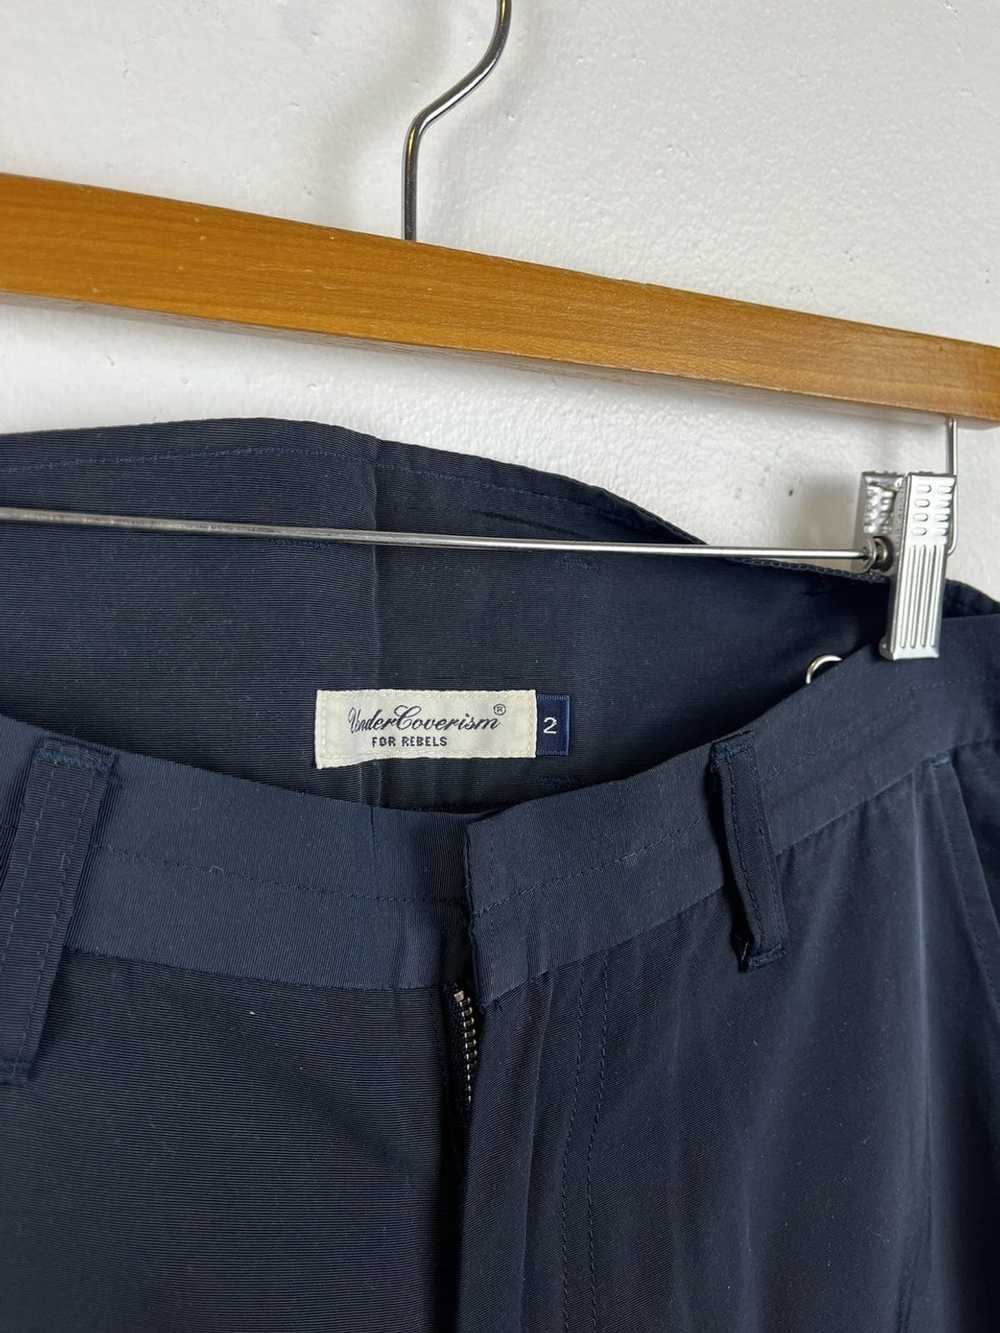 Undercover Undercover Pants - image 3